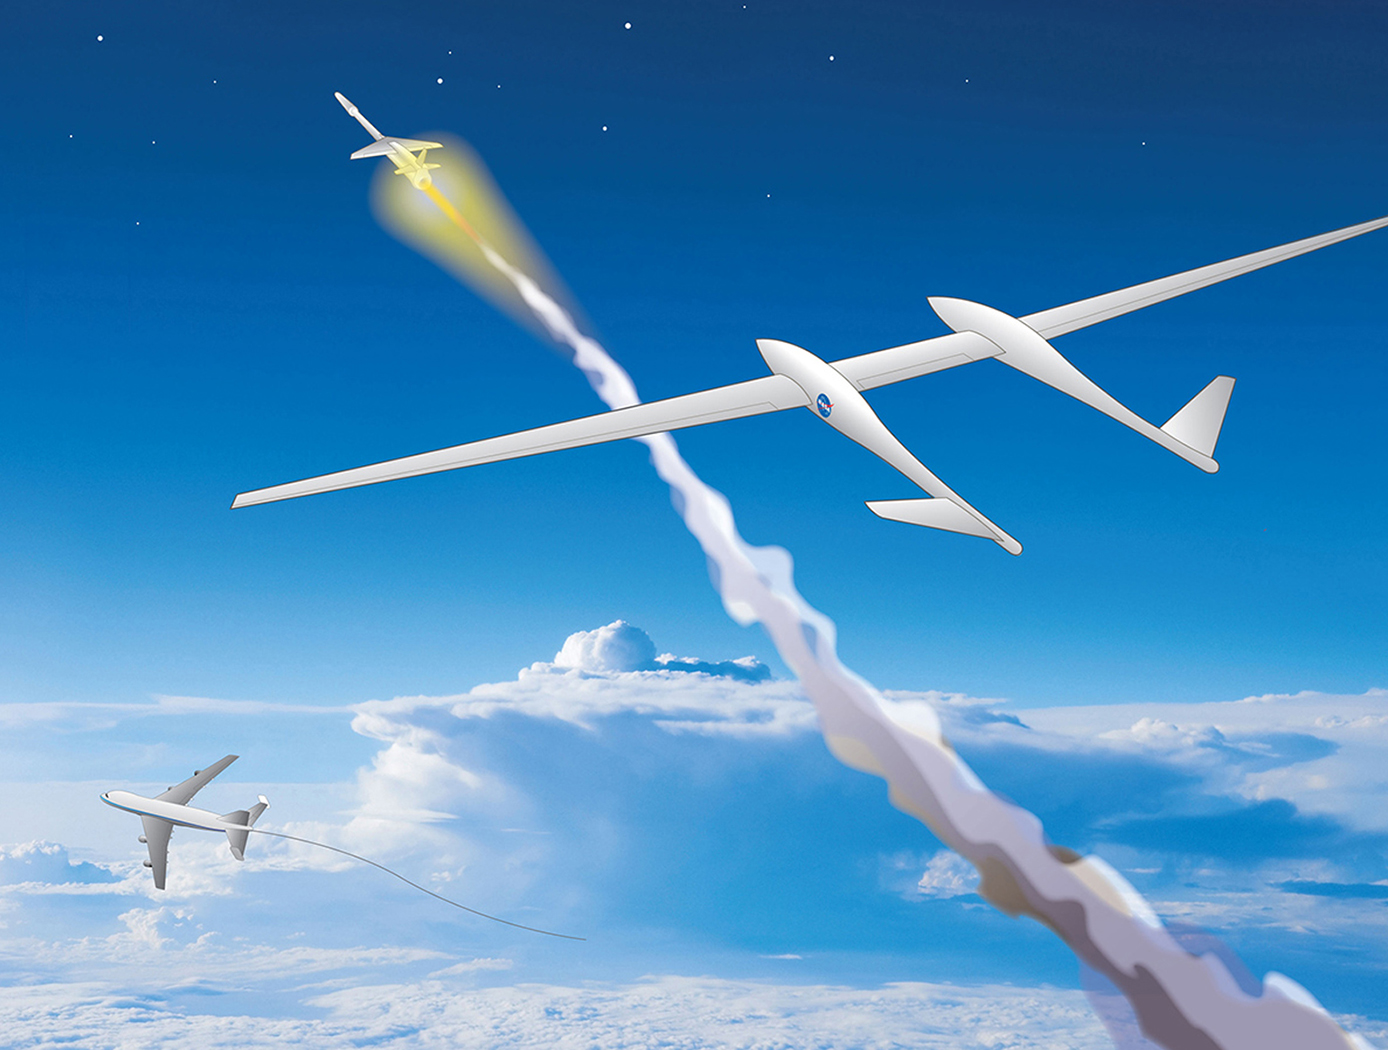 This artist's rendering shows the dual-fuselage glider and space-bound rocket moments after air launch, while the large towing airplane clears the launch area. (NASA image)